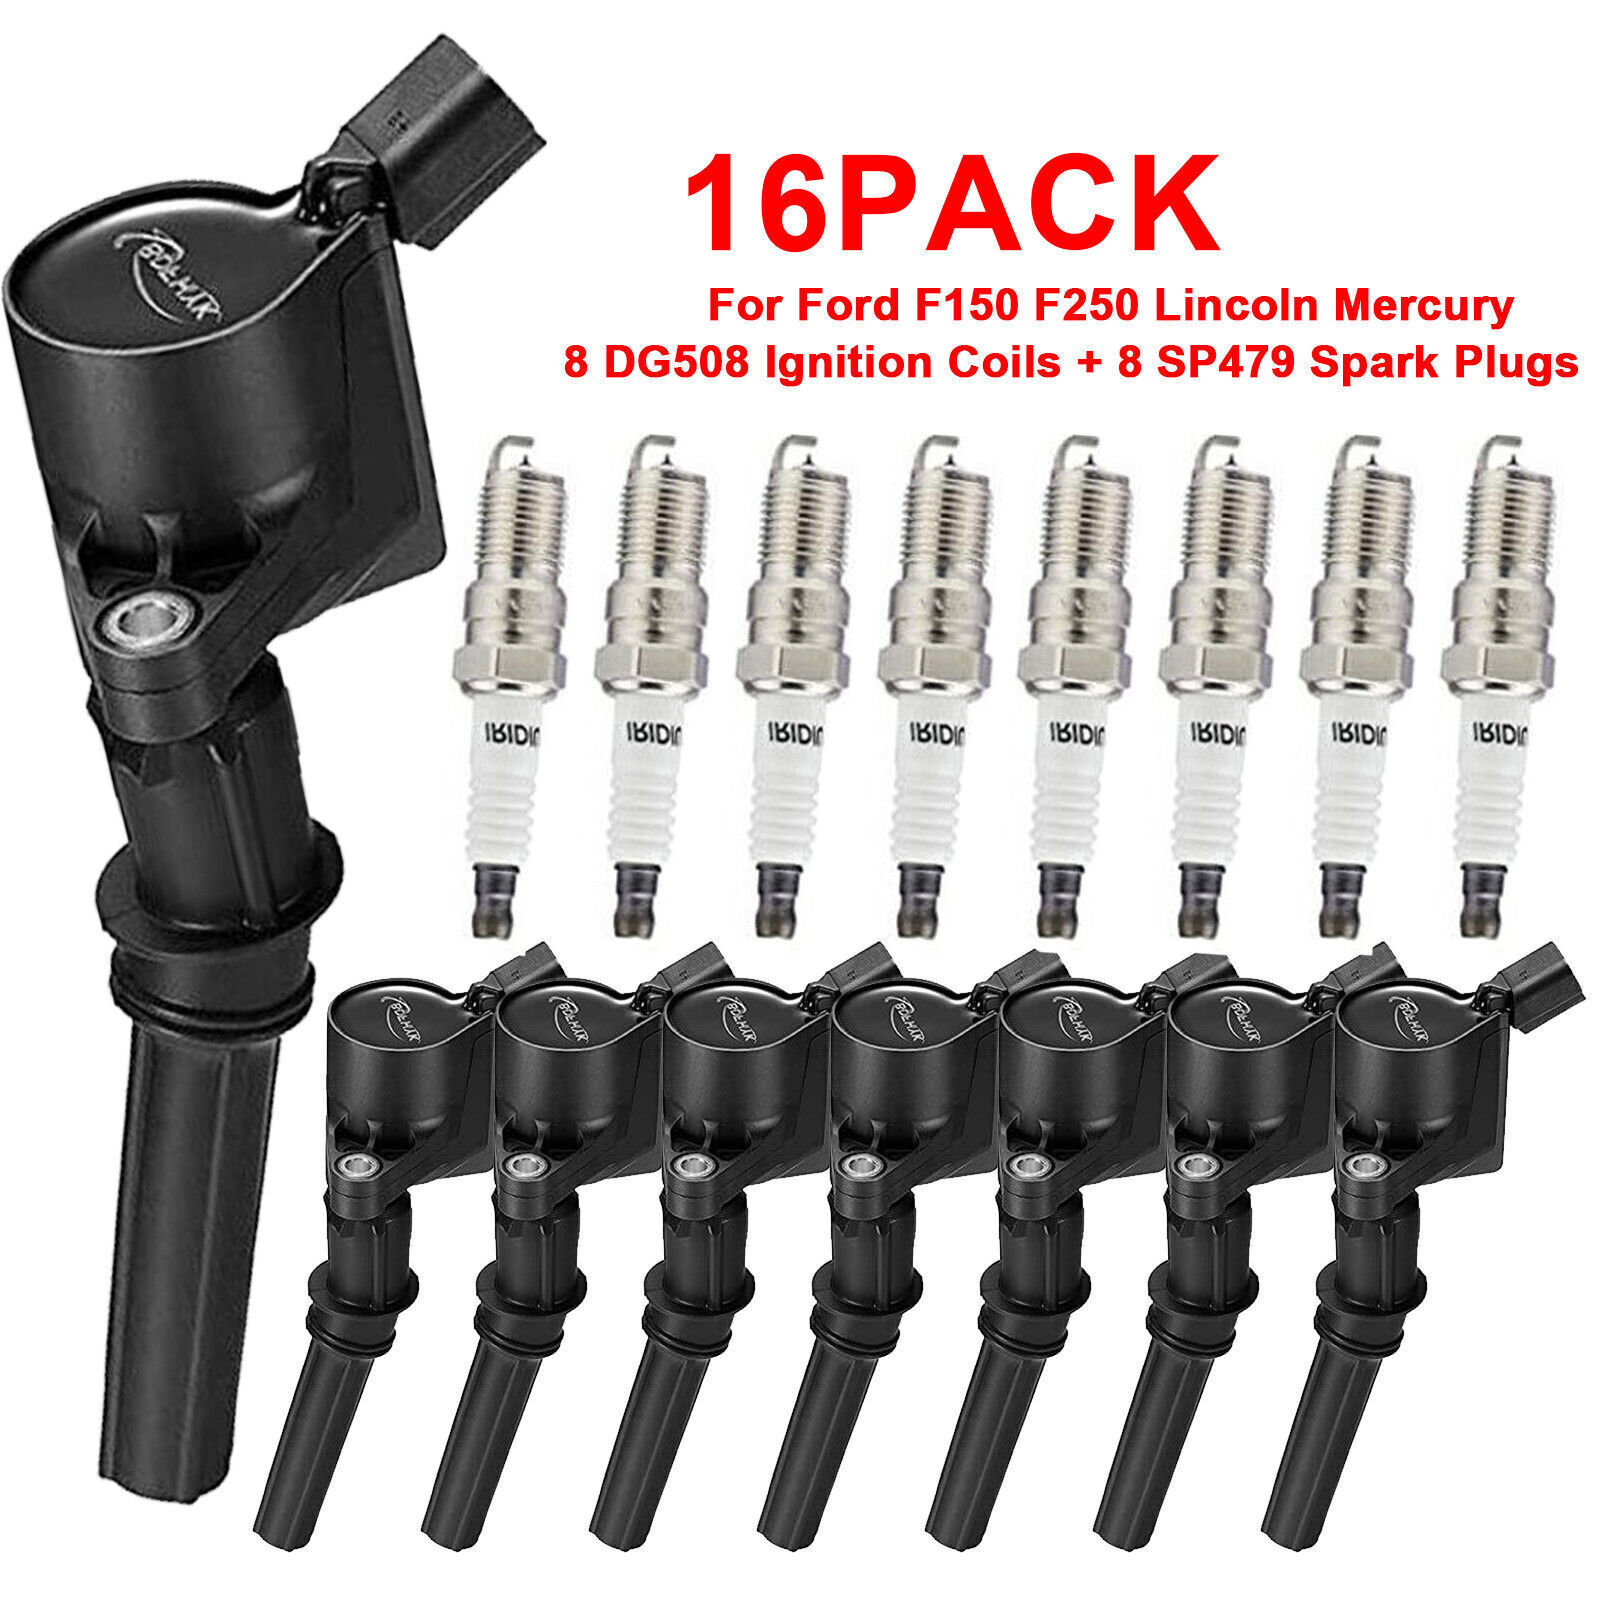 8 For Ford F-150 4.6L DG508 Ignition Coils Pack and Iridium Spark Plugs SP479